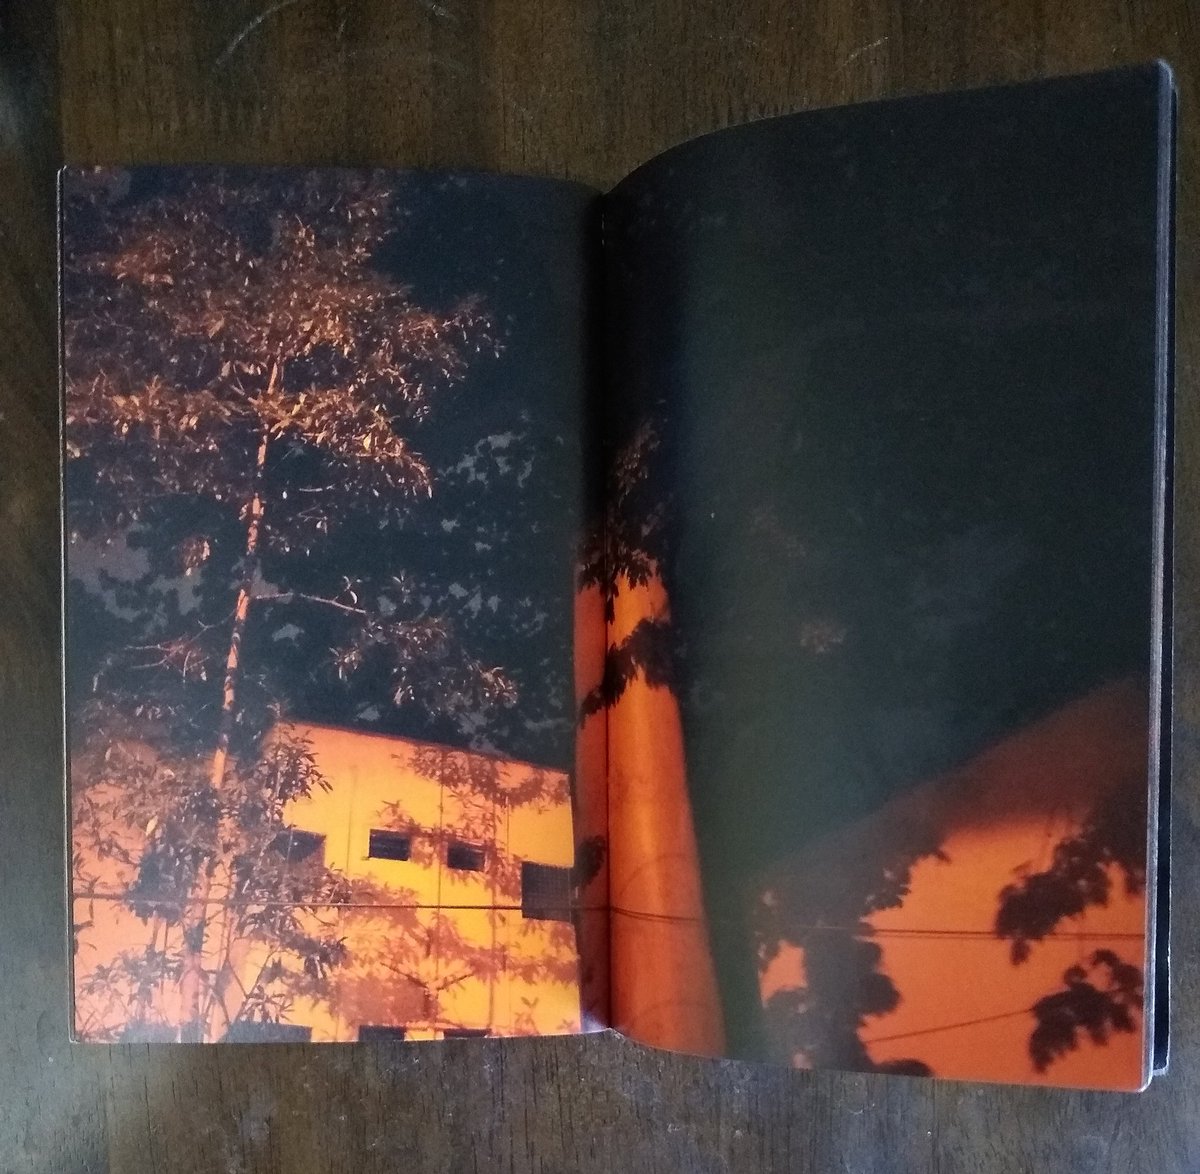 I love everything about it, even the odd format - square images printed full-bleed and across the gutter - and it's influenced my work quite a bit, as you can see from the photobook dummy I've been working on for a while now.